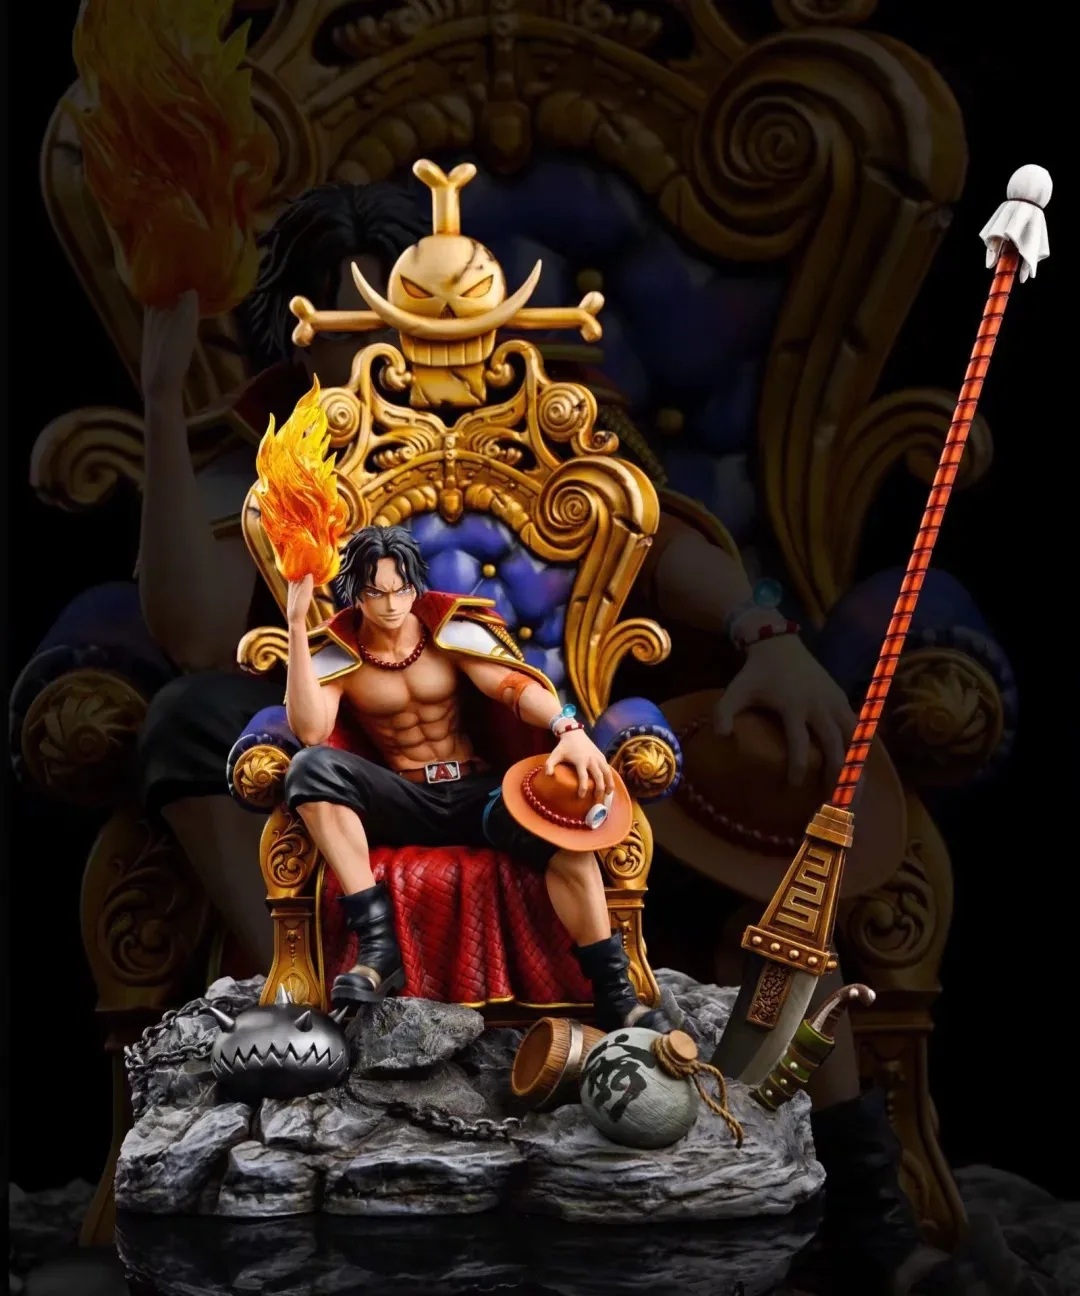 

35cm One Piece GK Resonance Series Throne Ace Statue Scene Model Ornament Aftion PVC collectible Model Figure Doll Toy Gifts